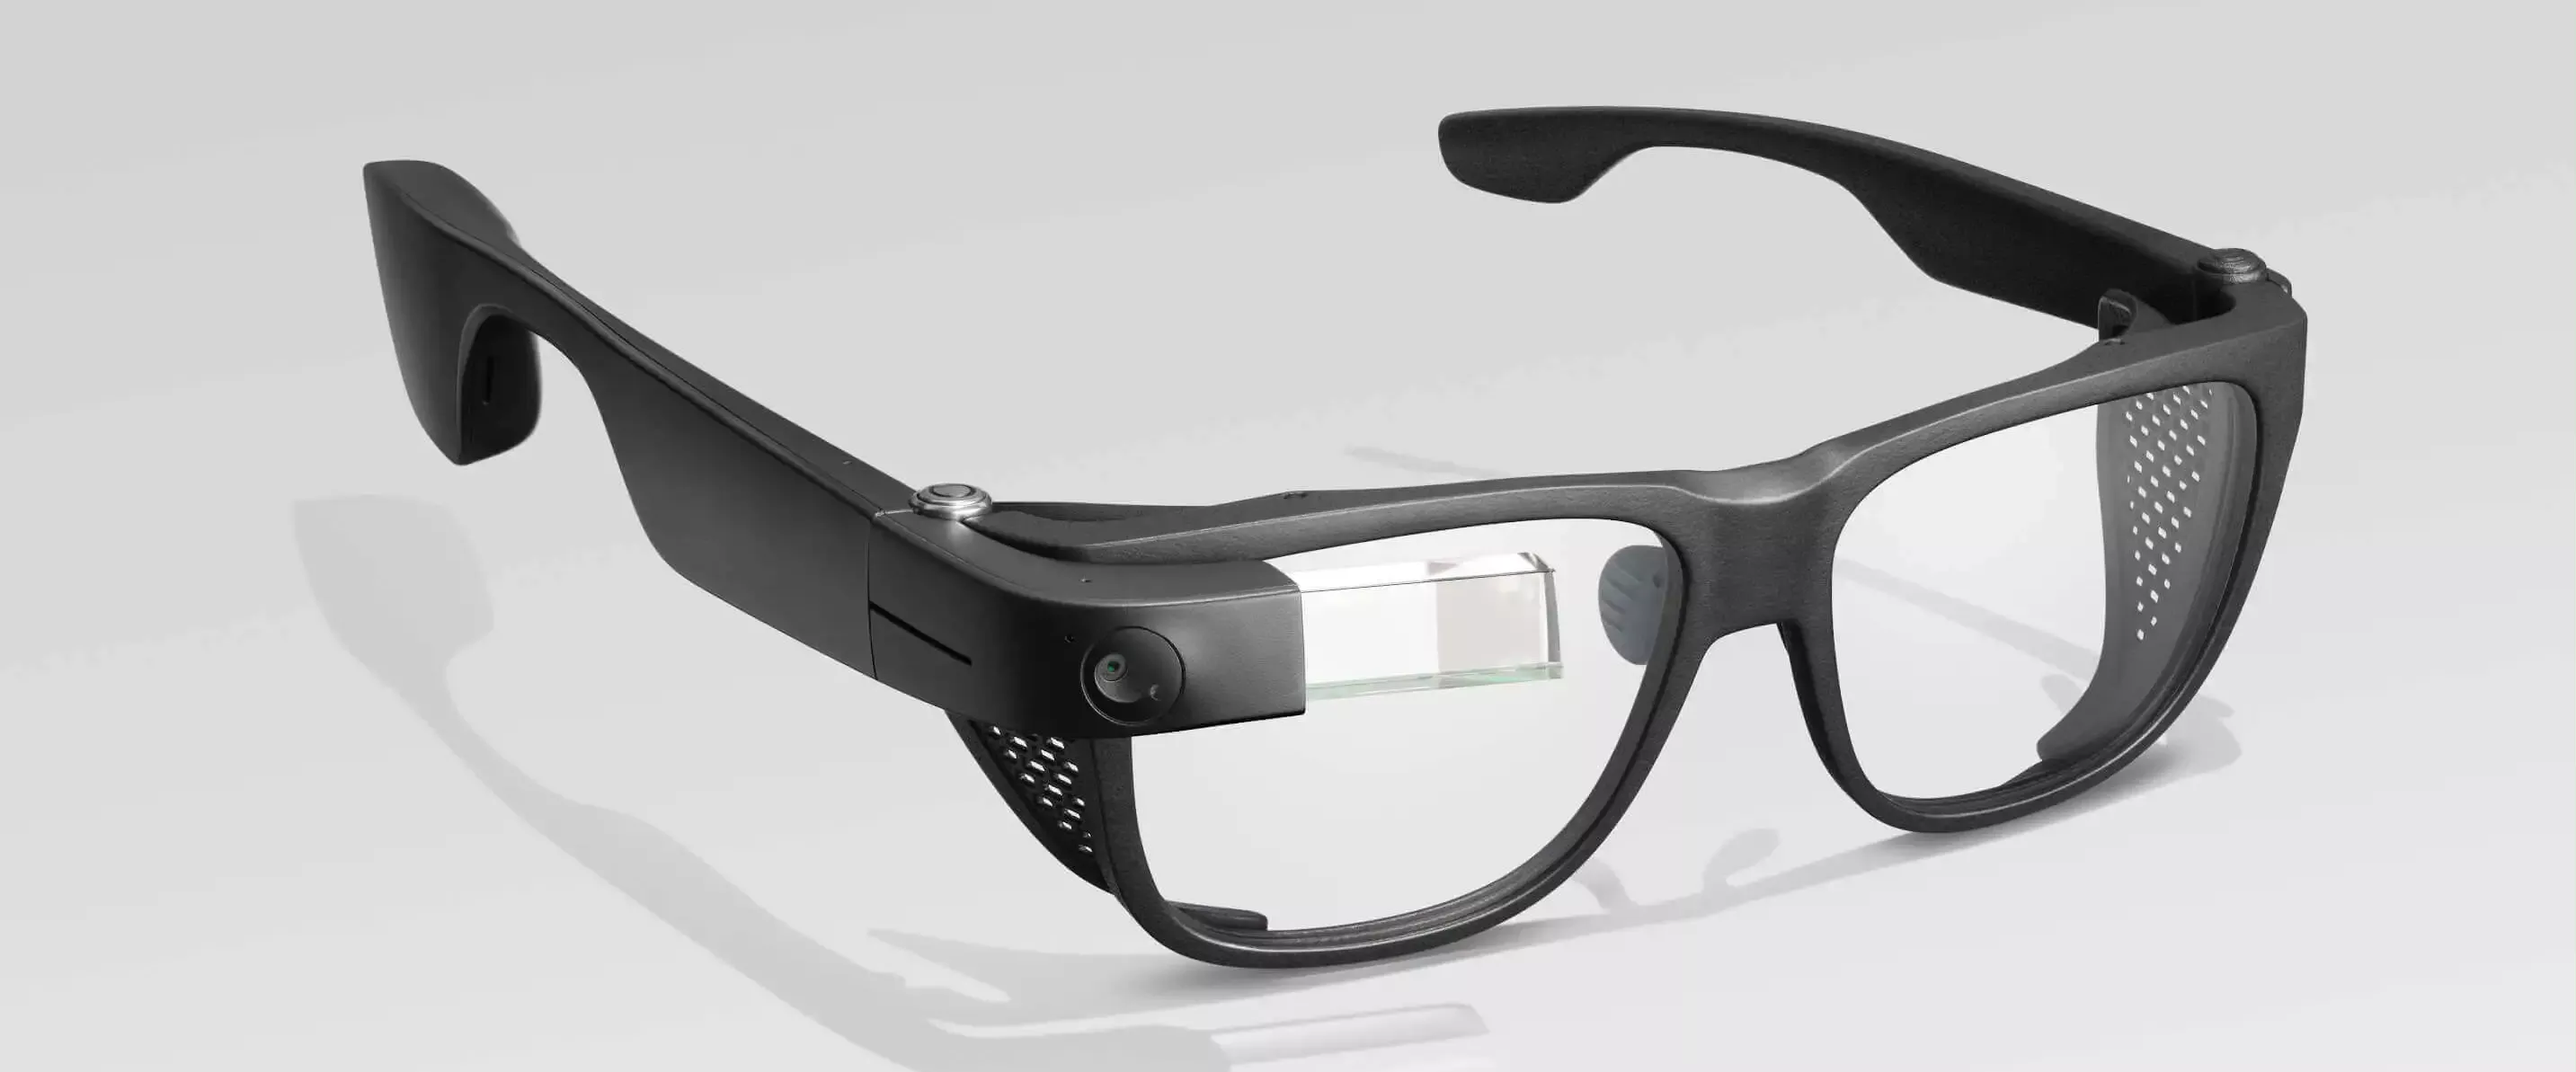 How can you use smart glasses?